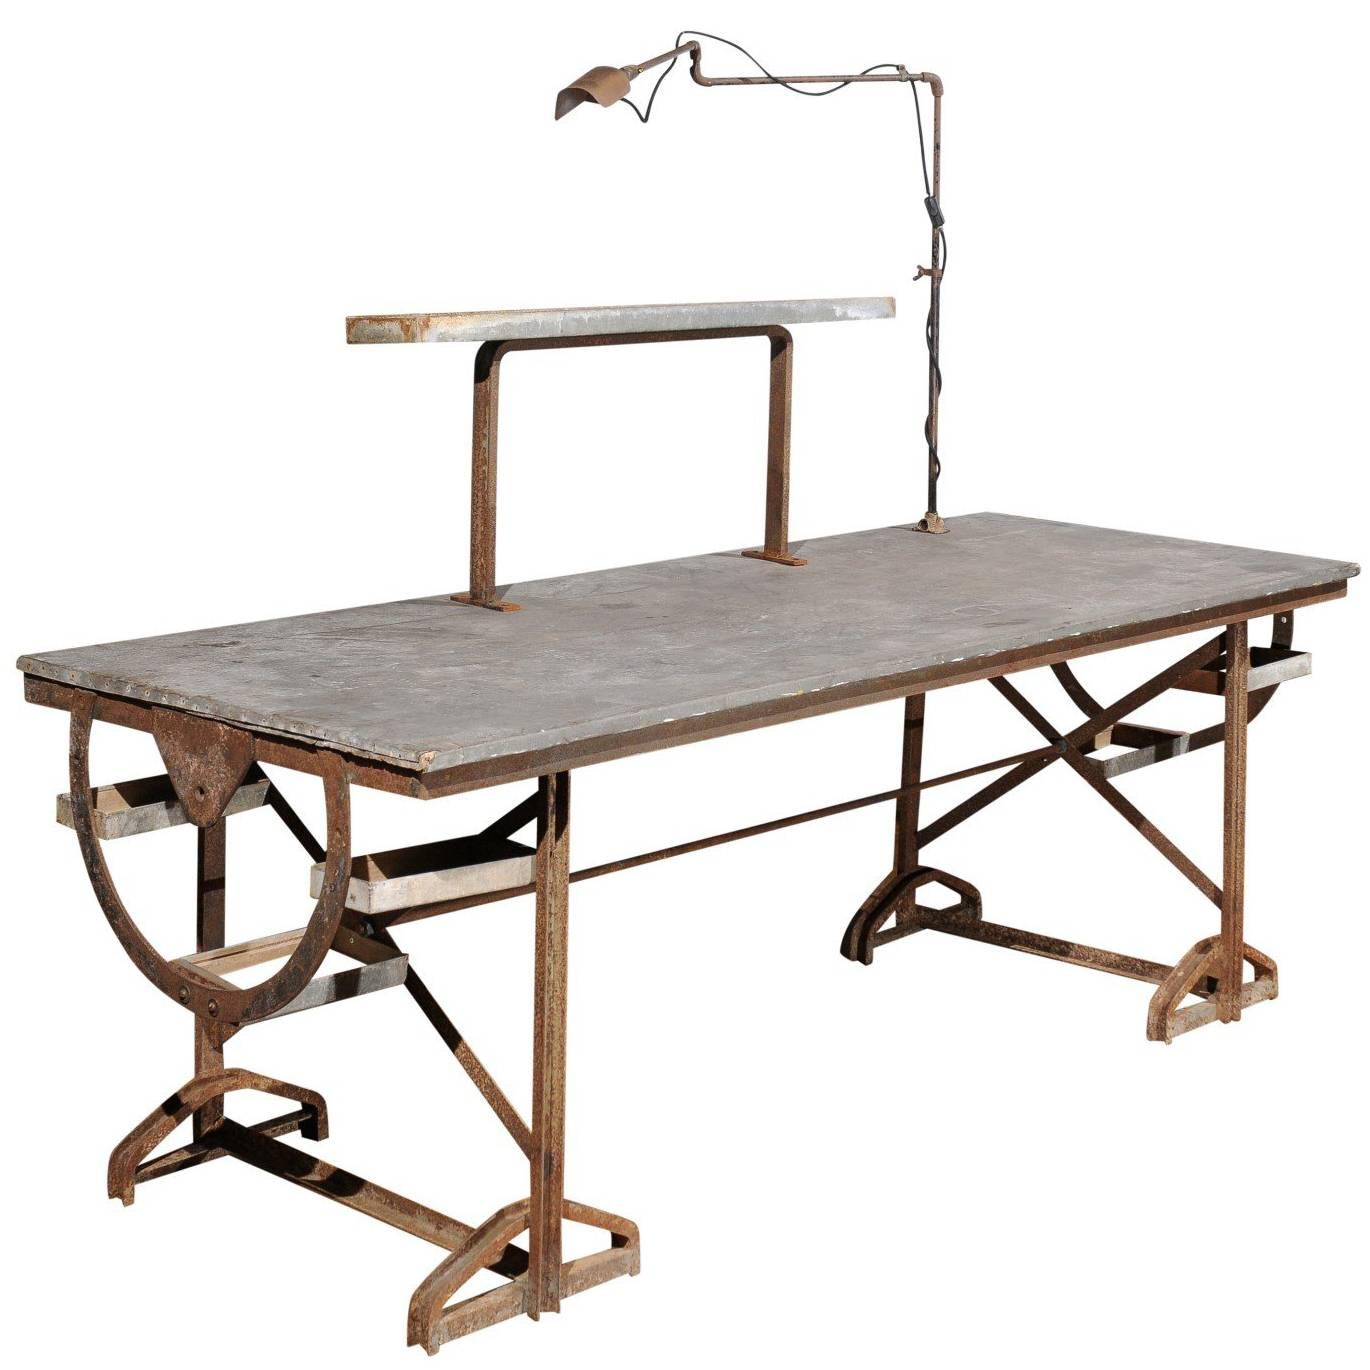 French 1890s Industrial Iron and Zinc Work Table with Shelves and Task Light